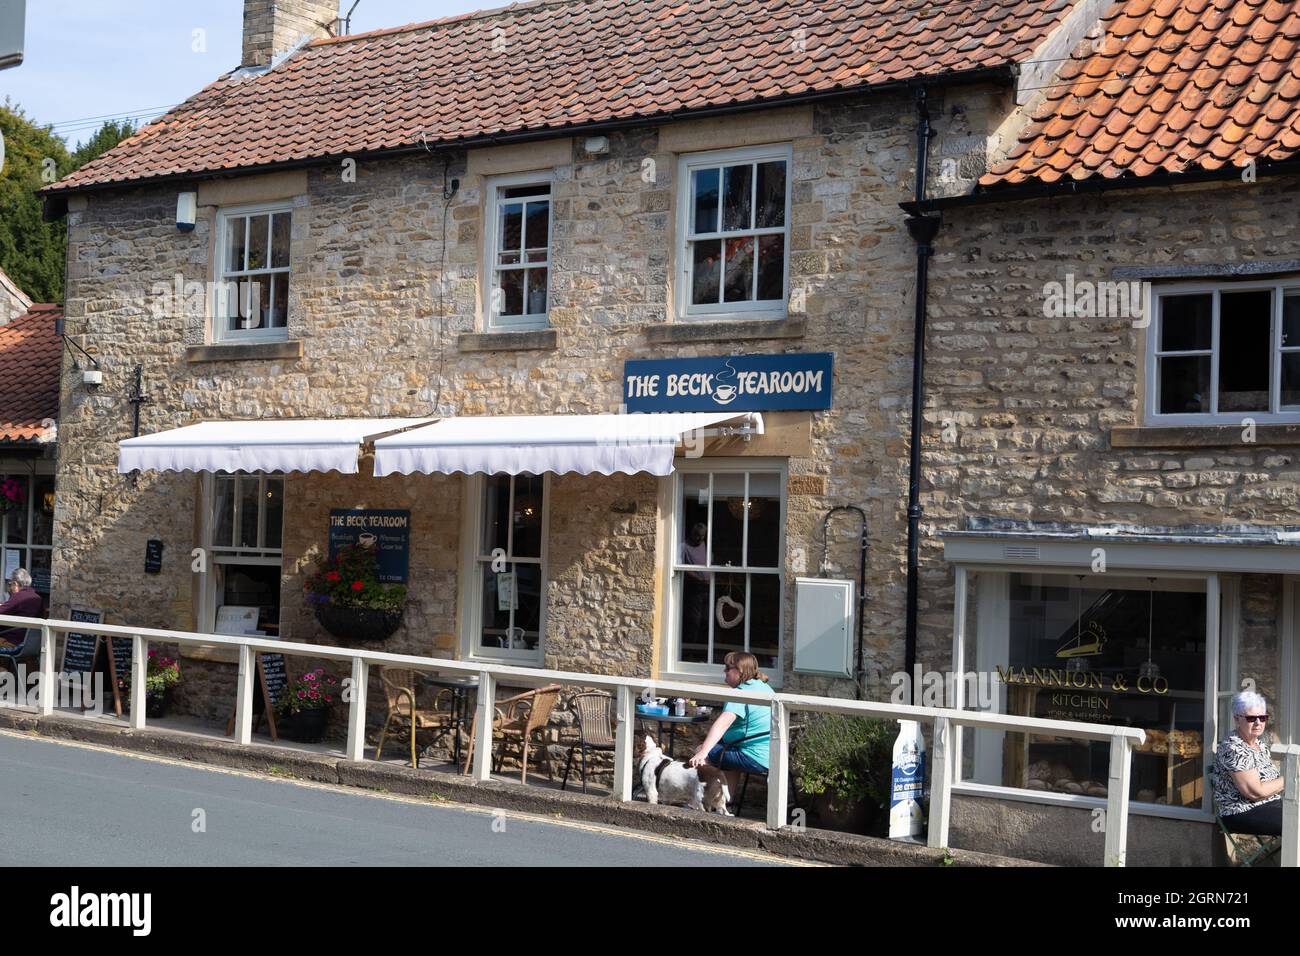 The Beck Tearoom, Helmsley, North Yorkshire Foto Stock